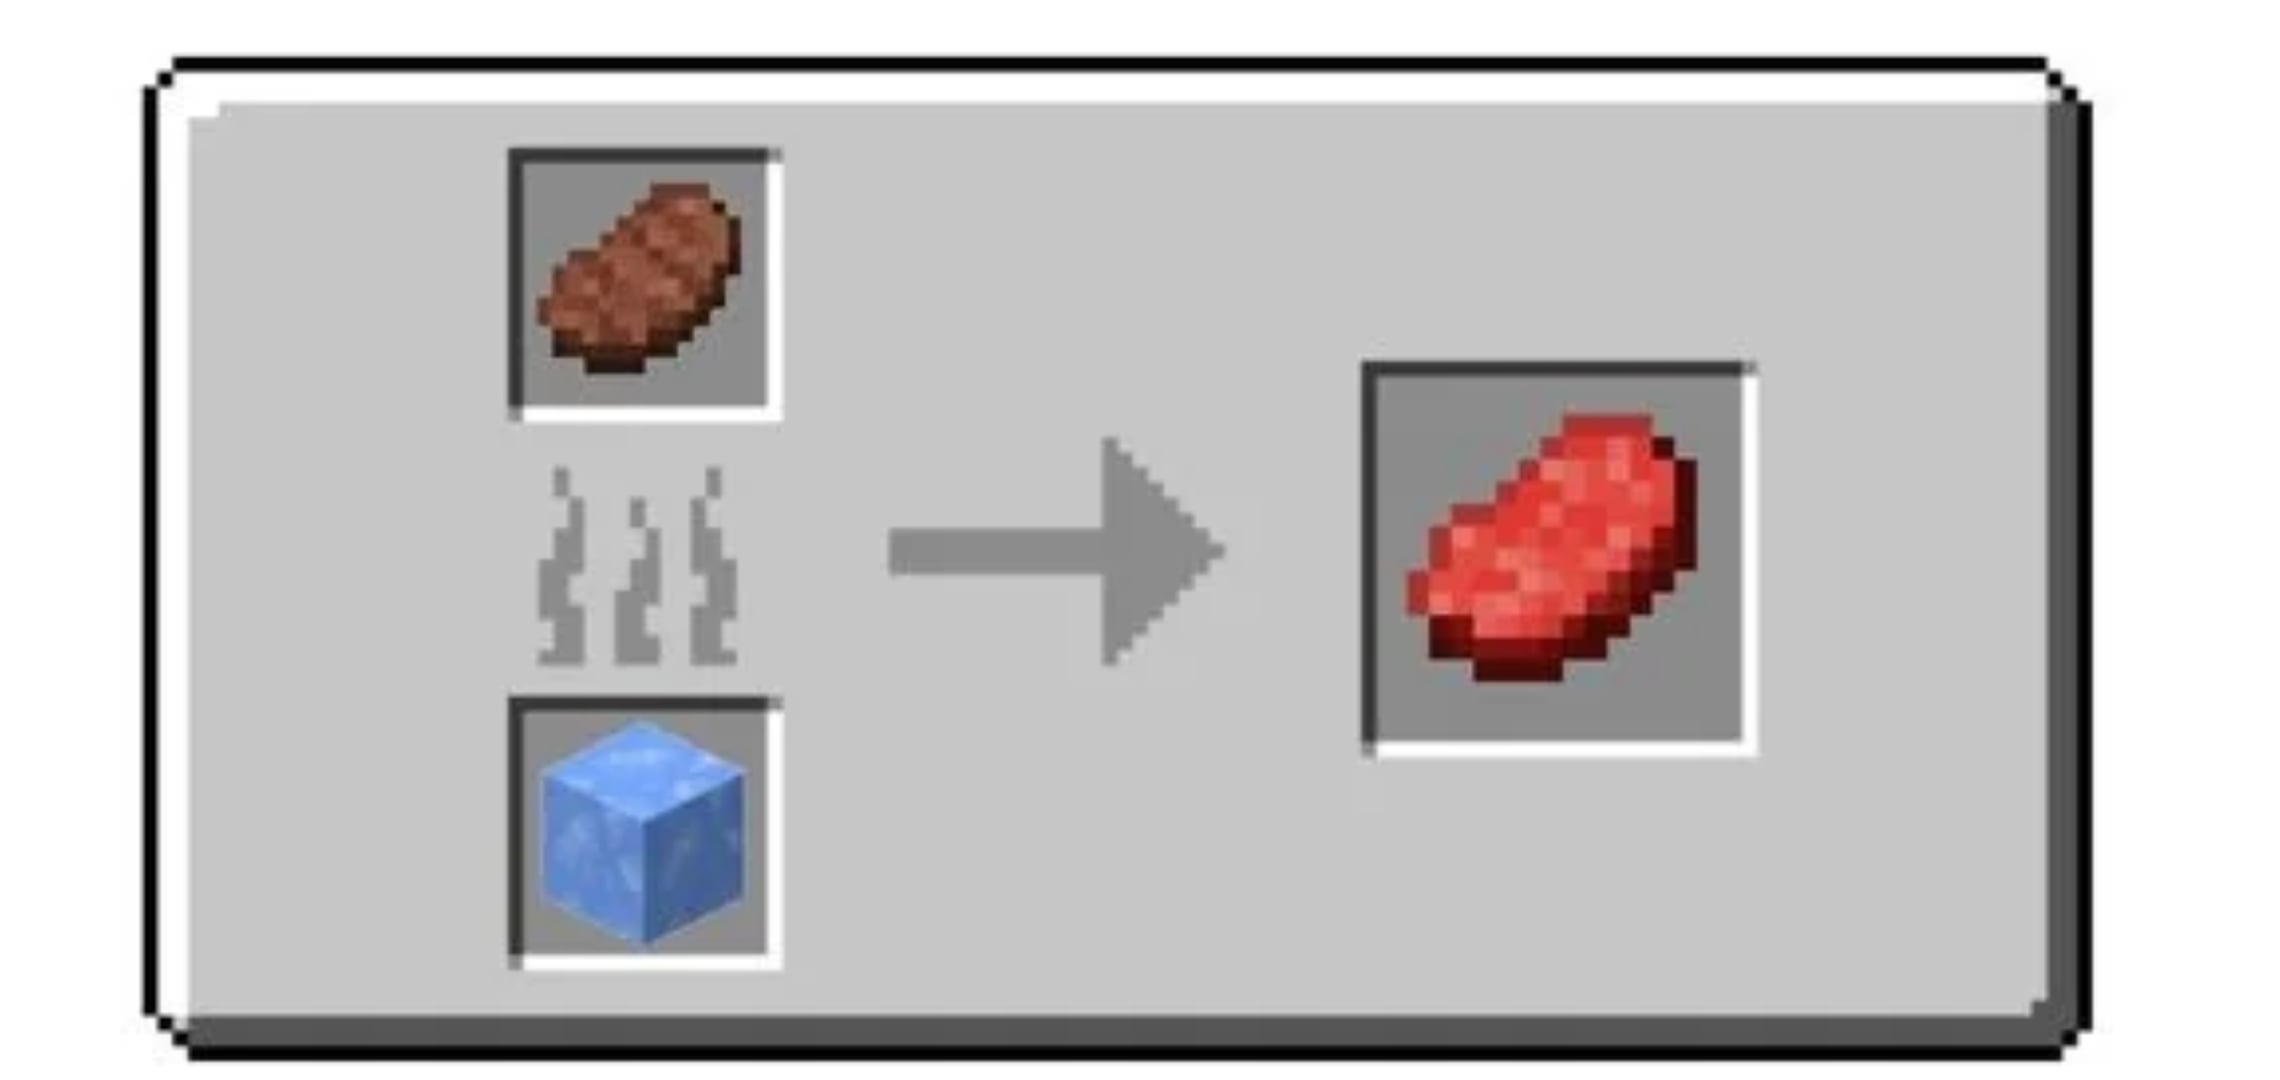 Minecraft Memes - No Steak for You